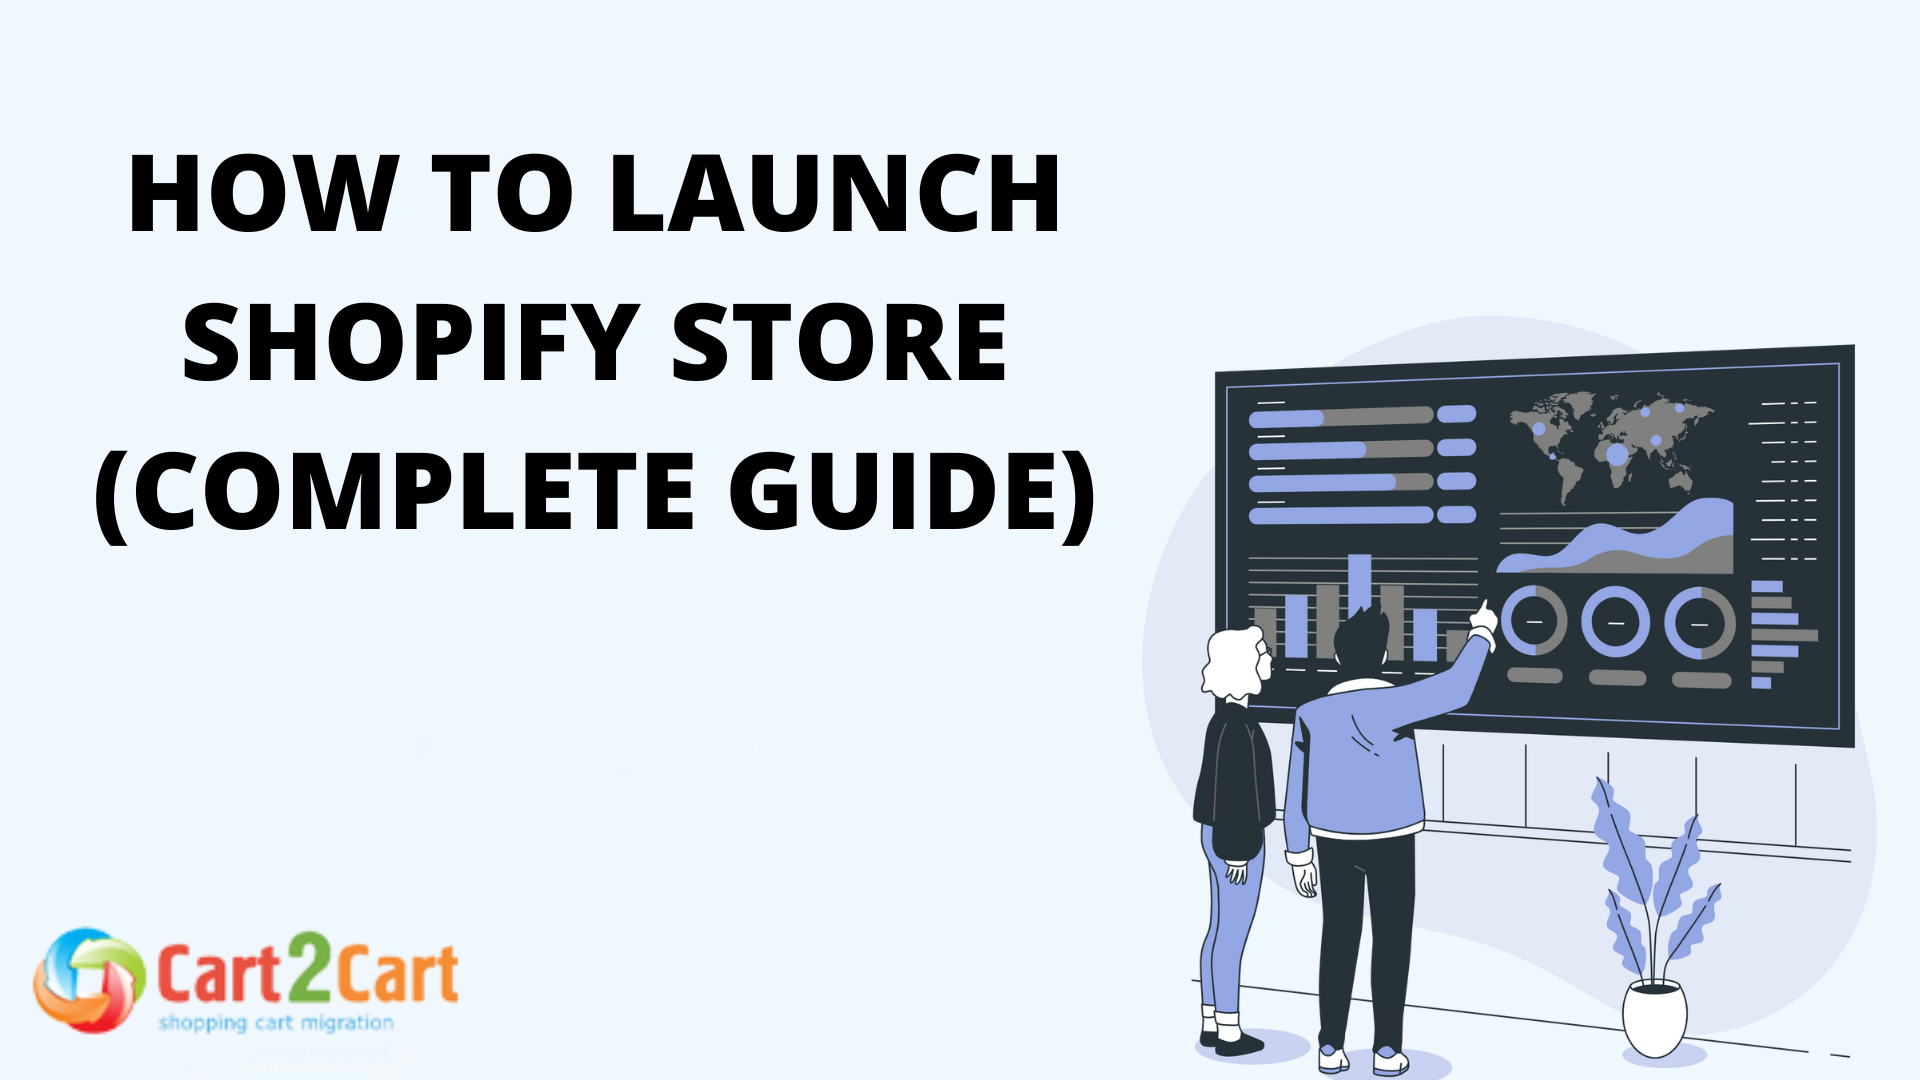 How to launch Shopify store (complete guide)